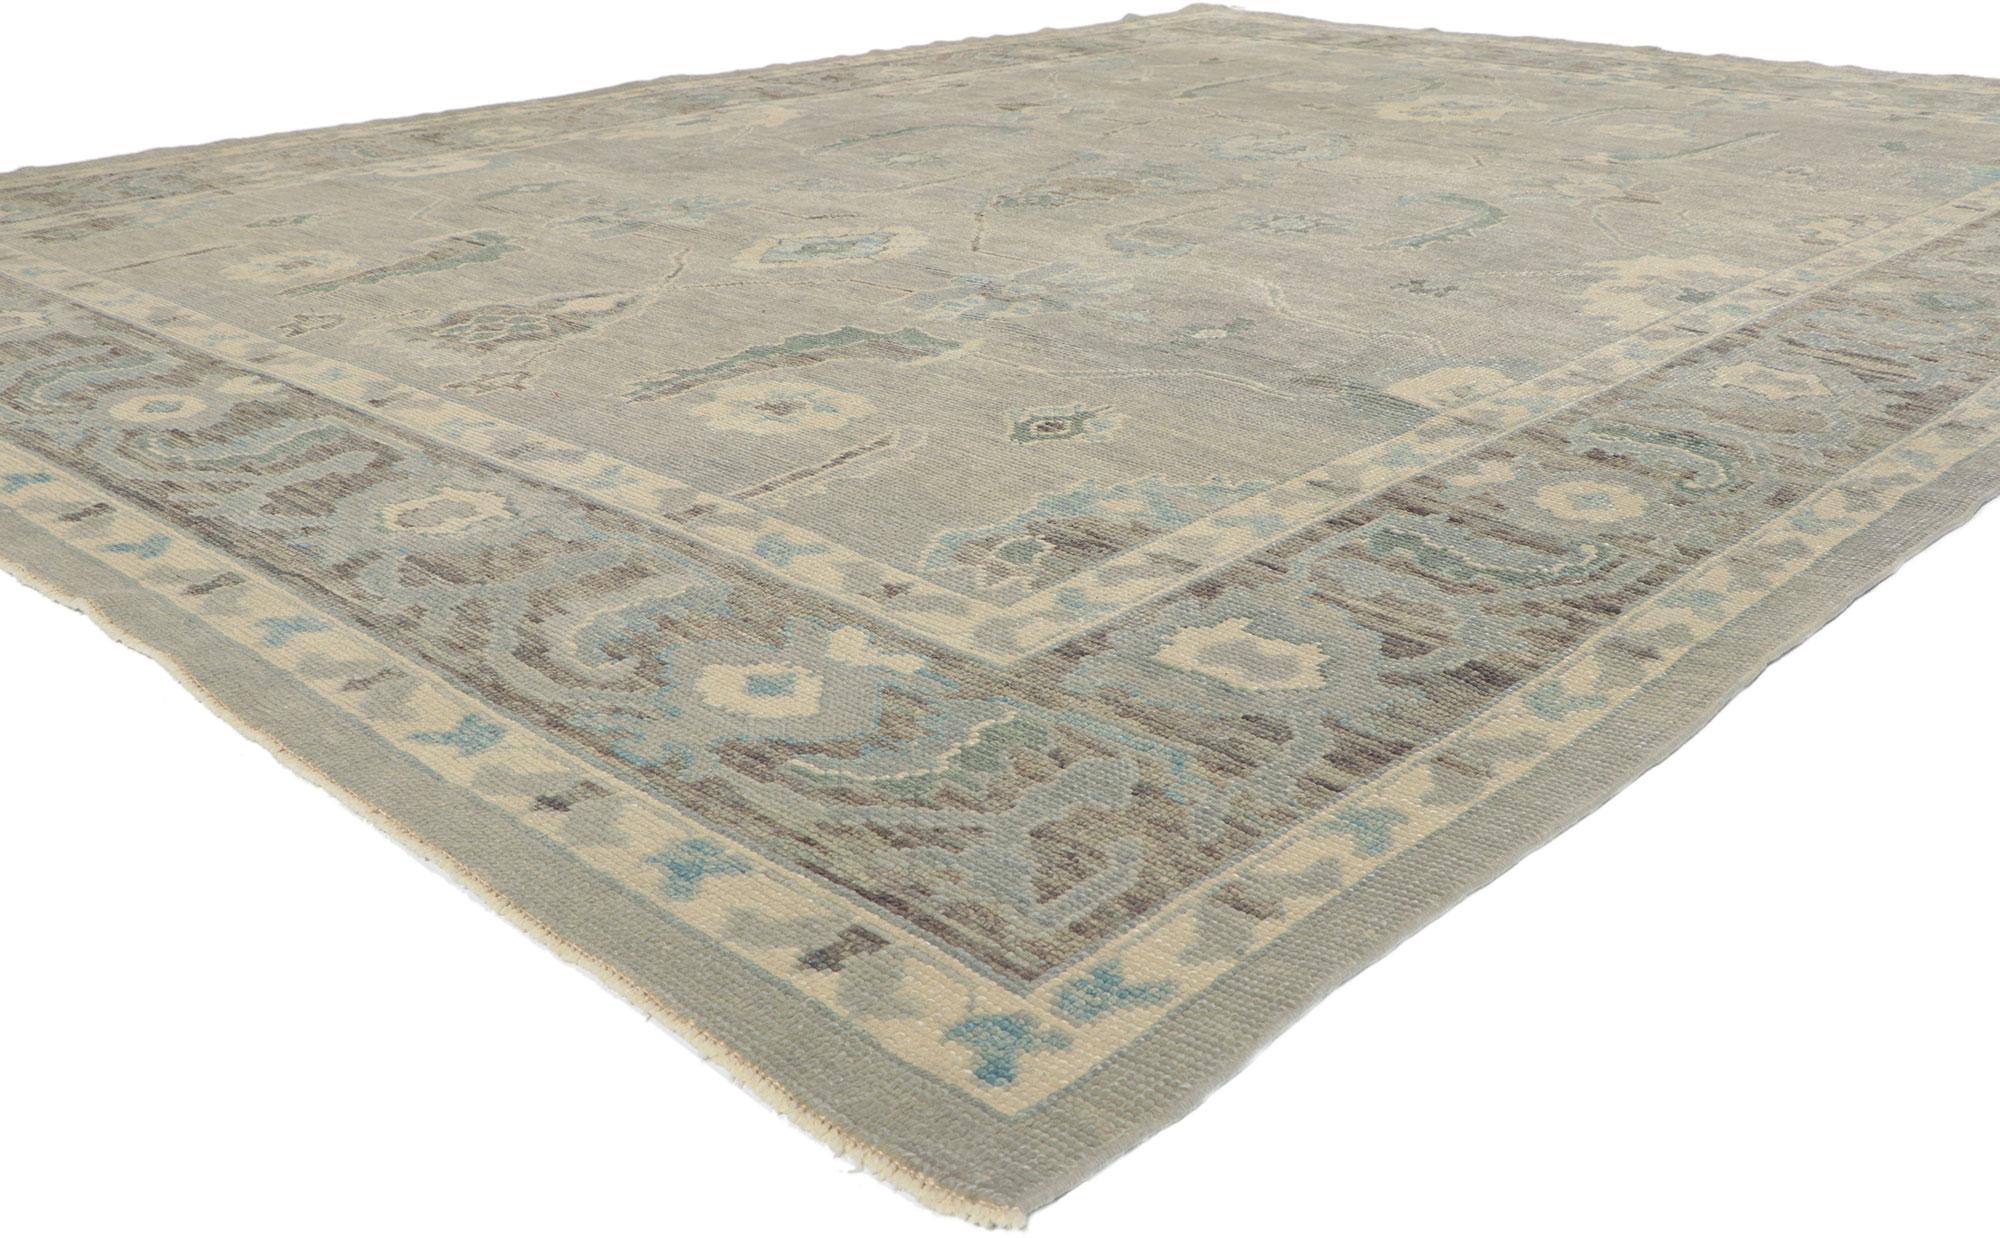 53803 new Turkish Oushak rug with Modern style, 09'05 x 12'06. Polished and playful, this hand-knotted wool contemporary Turkish Oushak rug beautifully embodies a modern style. The abrashed gray field features an array of Harshang motifs, serrated